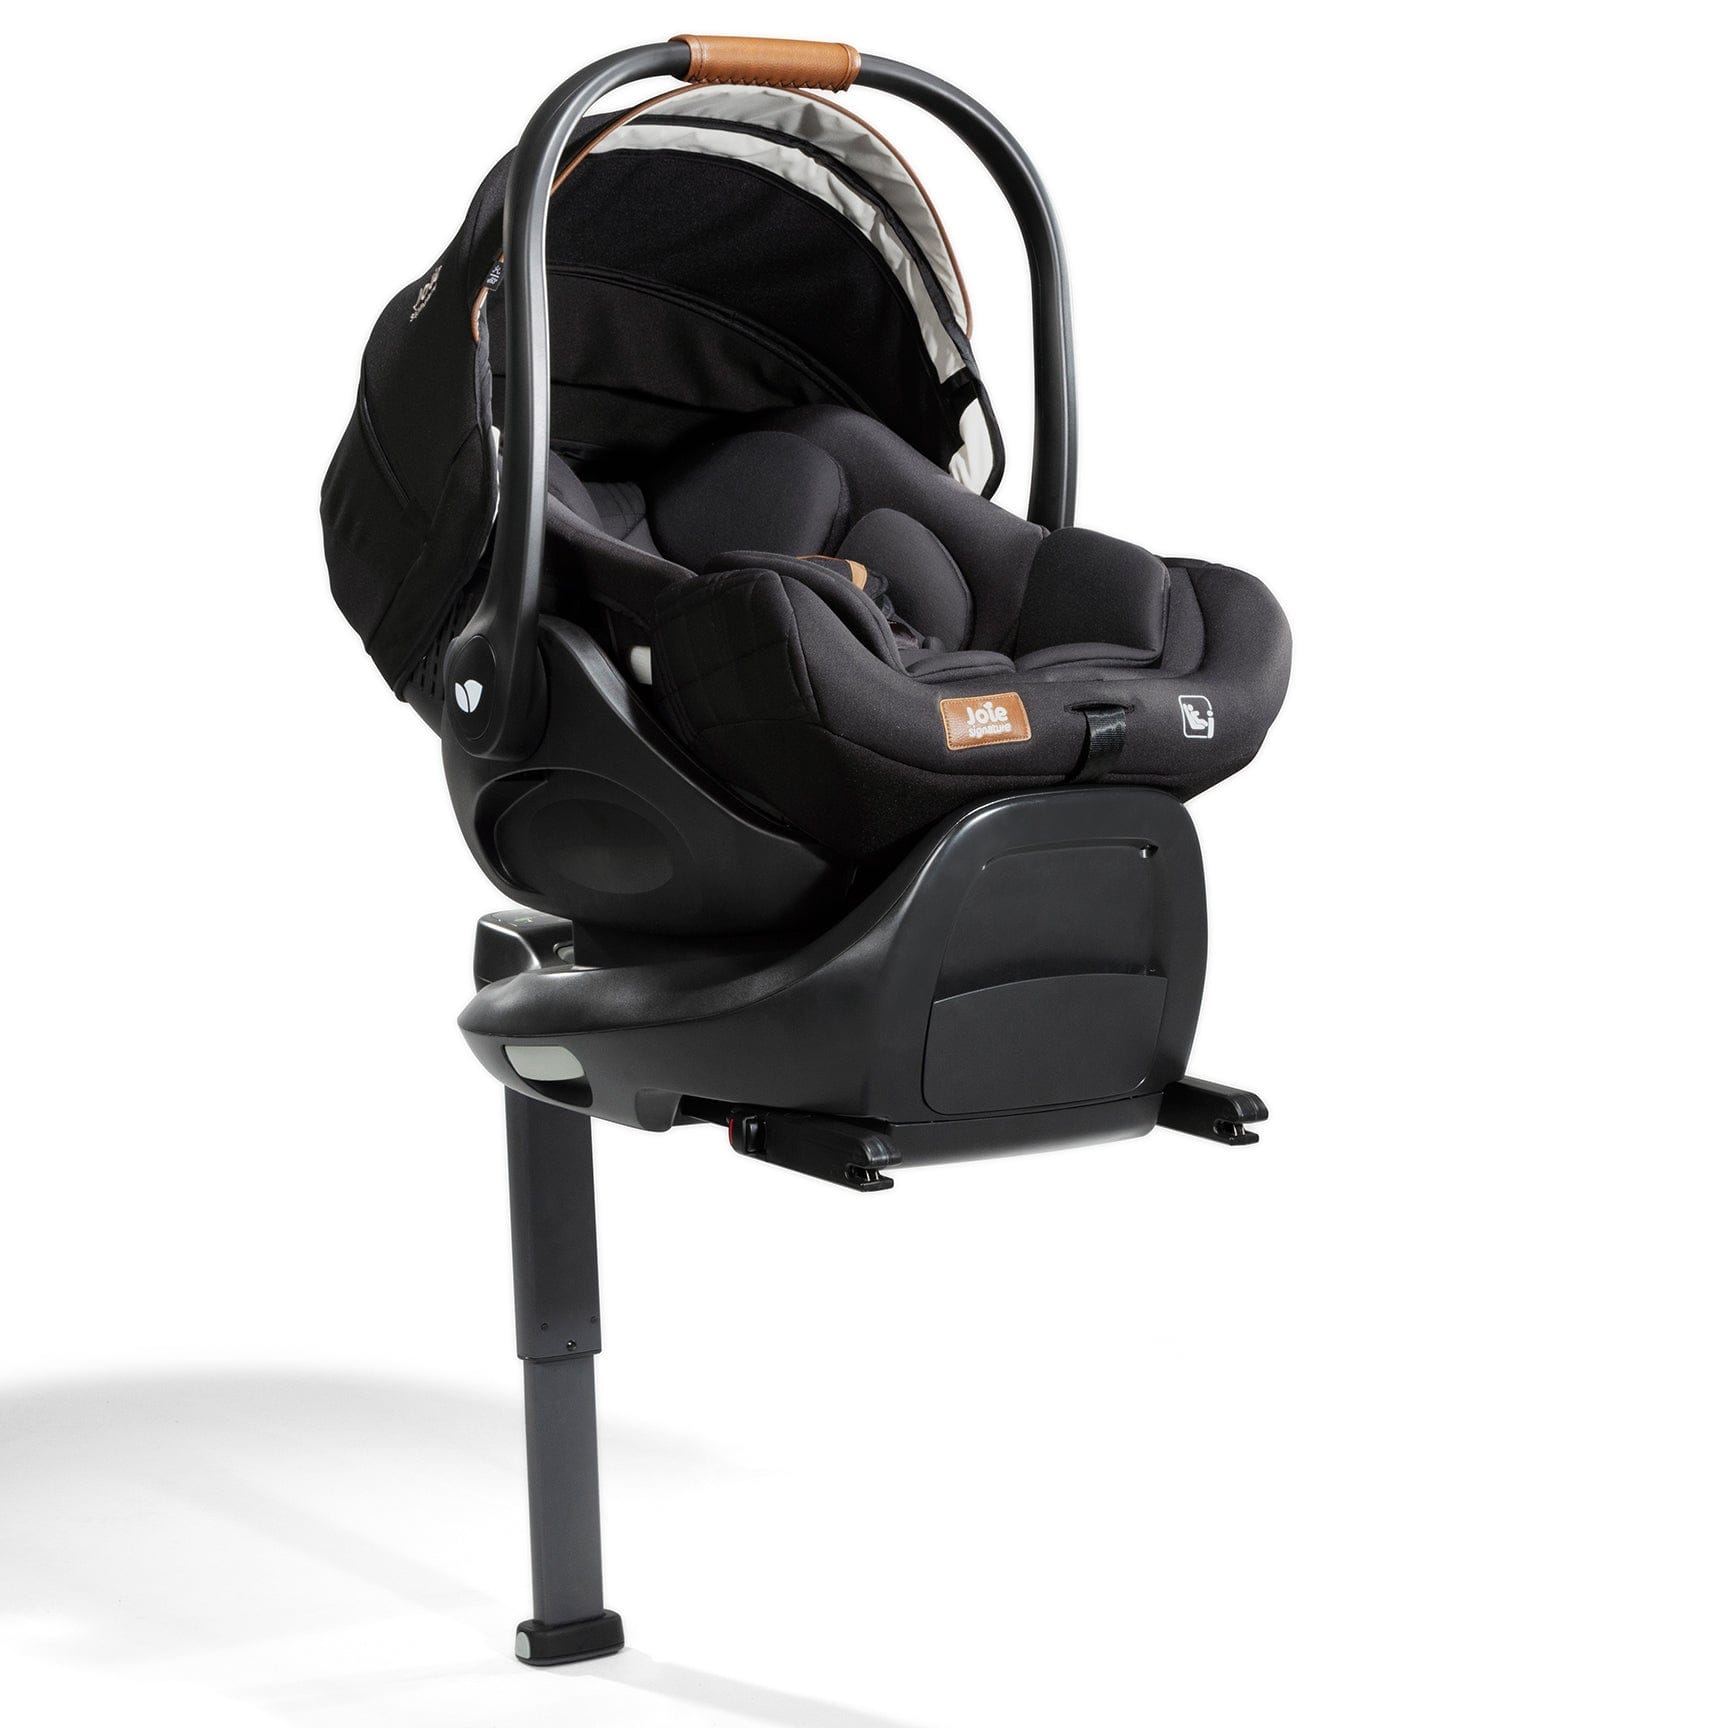 Joie i-Level Recline Signature Car Seat in Eclipse Baby Car Seats C1510GAECL000 5056080612867